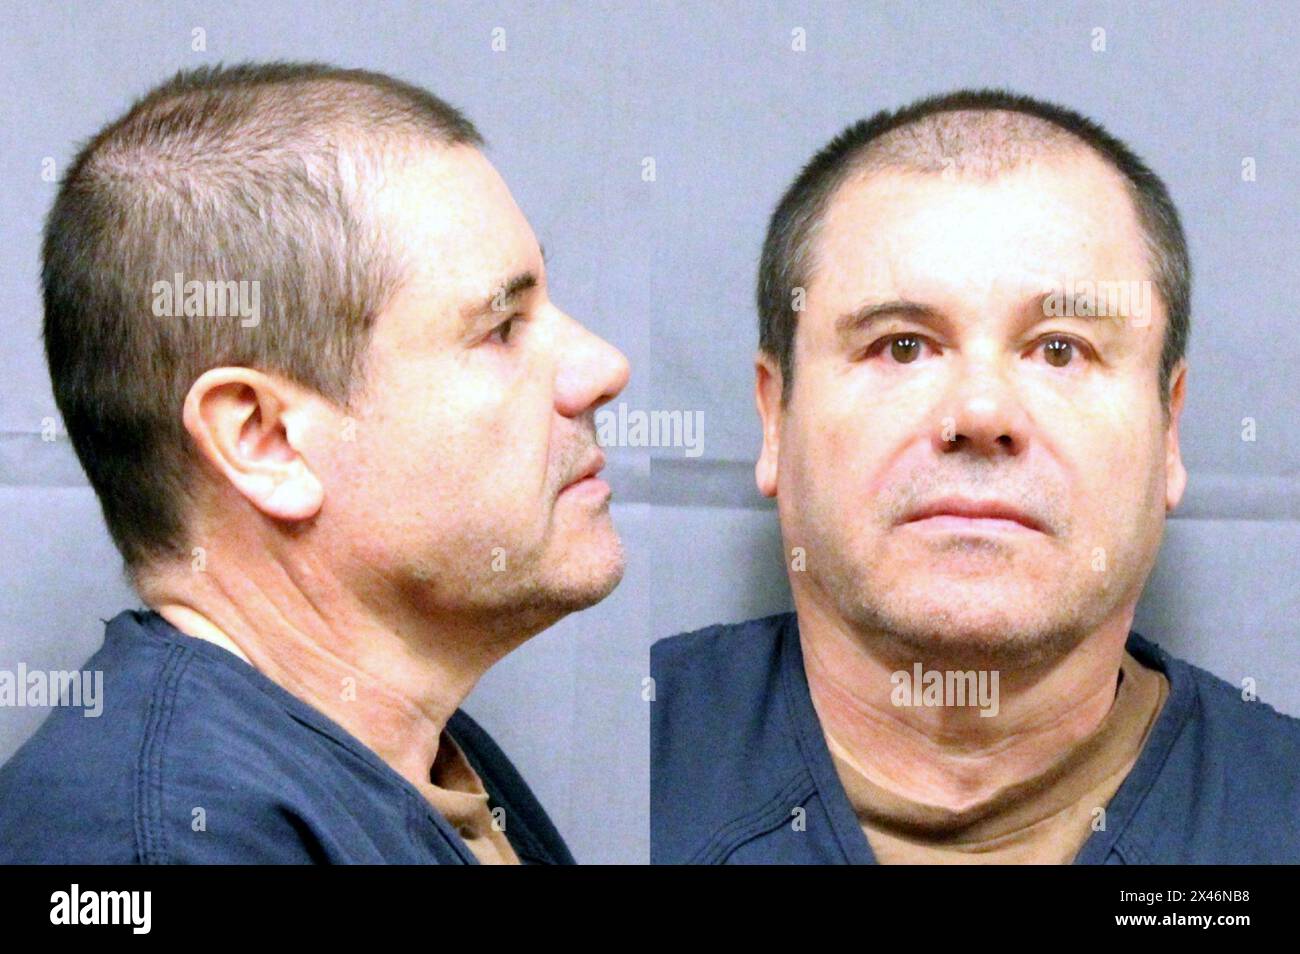 2017 , 19 january , USA : The Mexican criminal Joaquin EL CHAPO Guzman Loera ( born 1957 ), The Prince of Cocaine . Leader within the Sinaloa Cartel , an international crime syndicate. He is considered to have been one of the most powerful drug traffickers in the world.Booking photo after he arrived in the United States following his extradition from Mexico in 2017 . Police mugshot by DEA . - FOTO STORICHE - HISTORY - portrait -  foto segnaletica - El Rápido - mug-shot - mug shot - mugshot - ritratto - CRONACA NERA - CRIME - ASSASSINO - KILLER - CRIMINALE - MESSICO - MEXICO - TRAFFICANTE DI DR Stock Photo